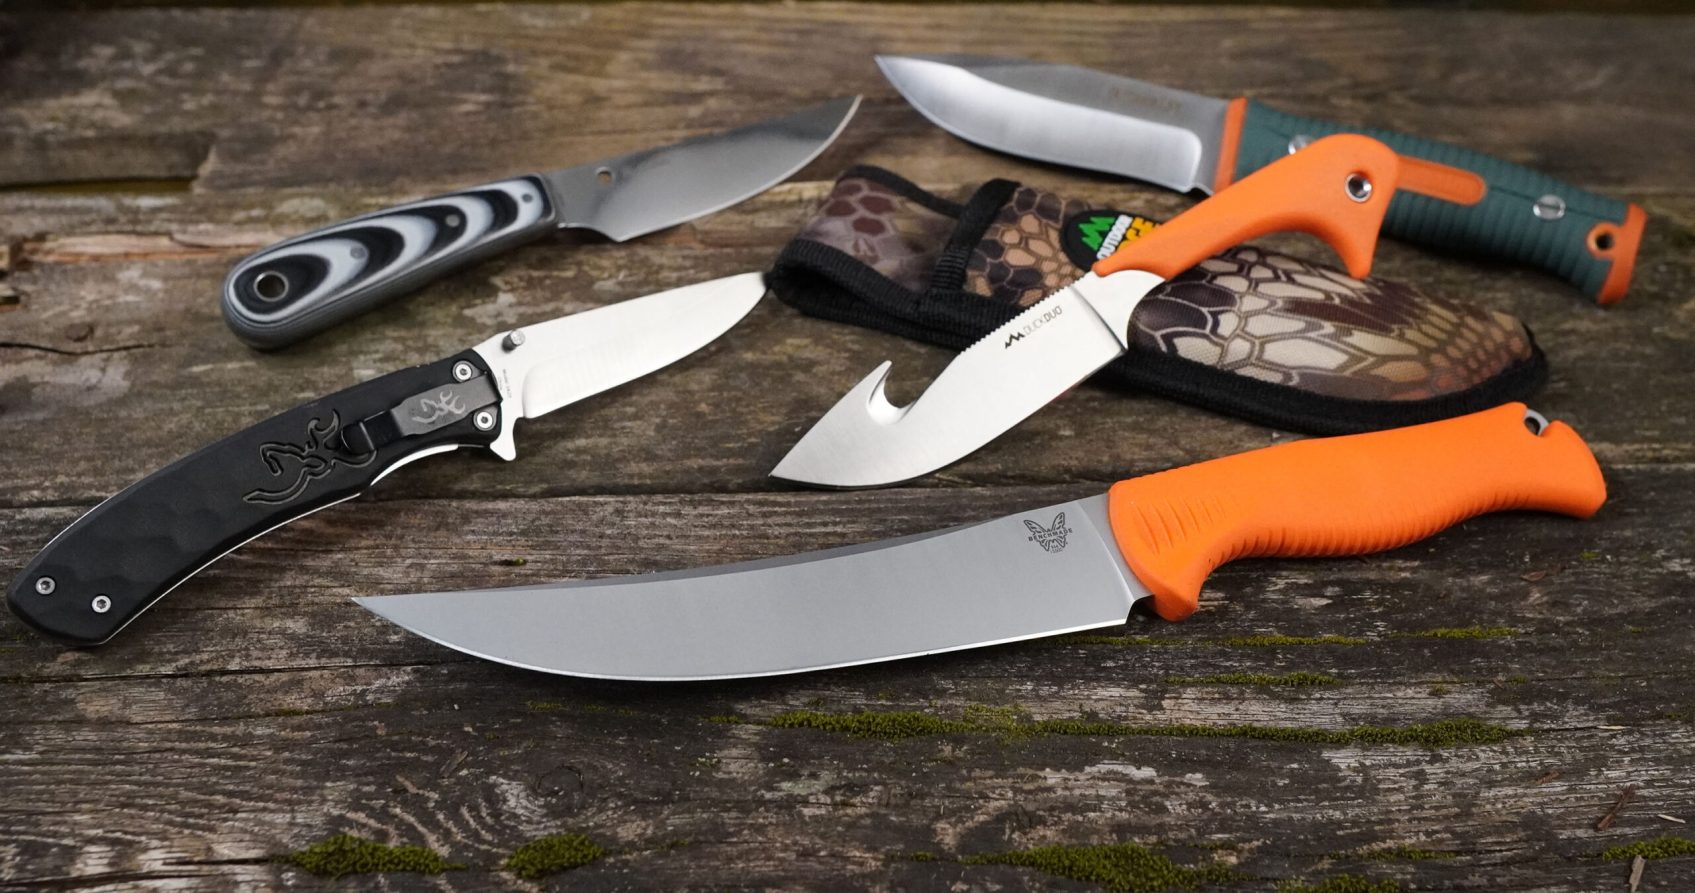  WILD TACTICAL Camping Fixed Blade Knife, with Kydex Sheath and  Pocket Clip for Outdoor Survival Hunting Fishing : Sports & Outdoors